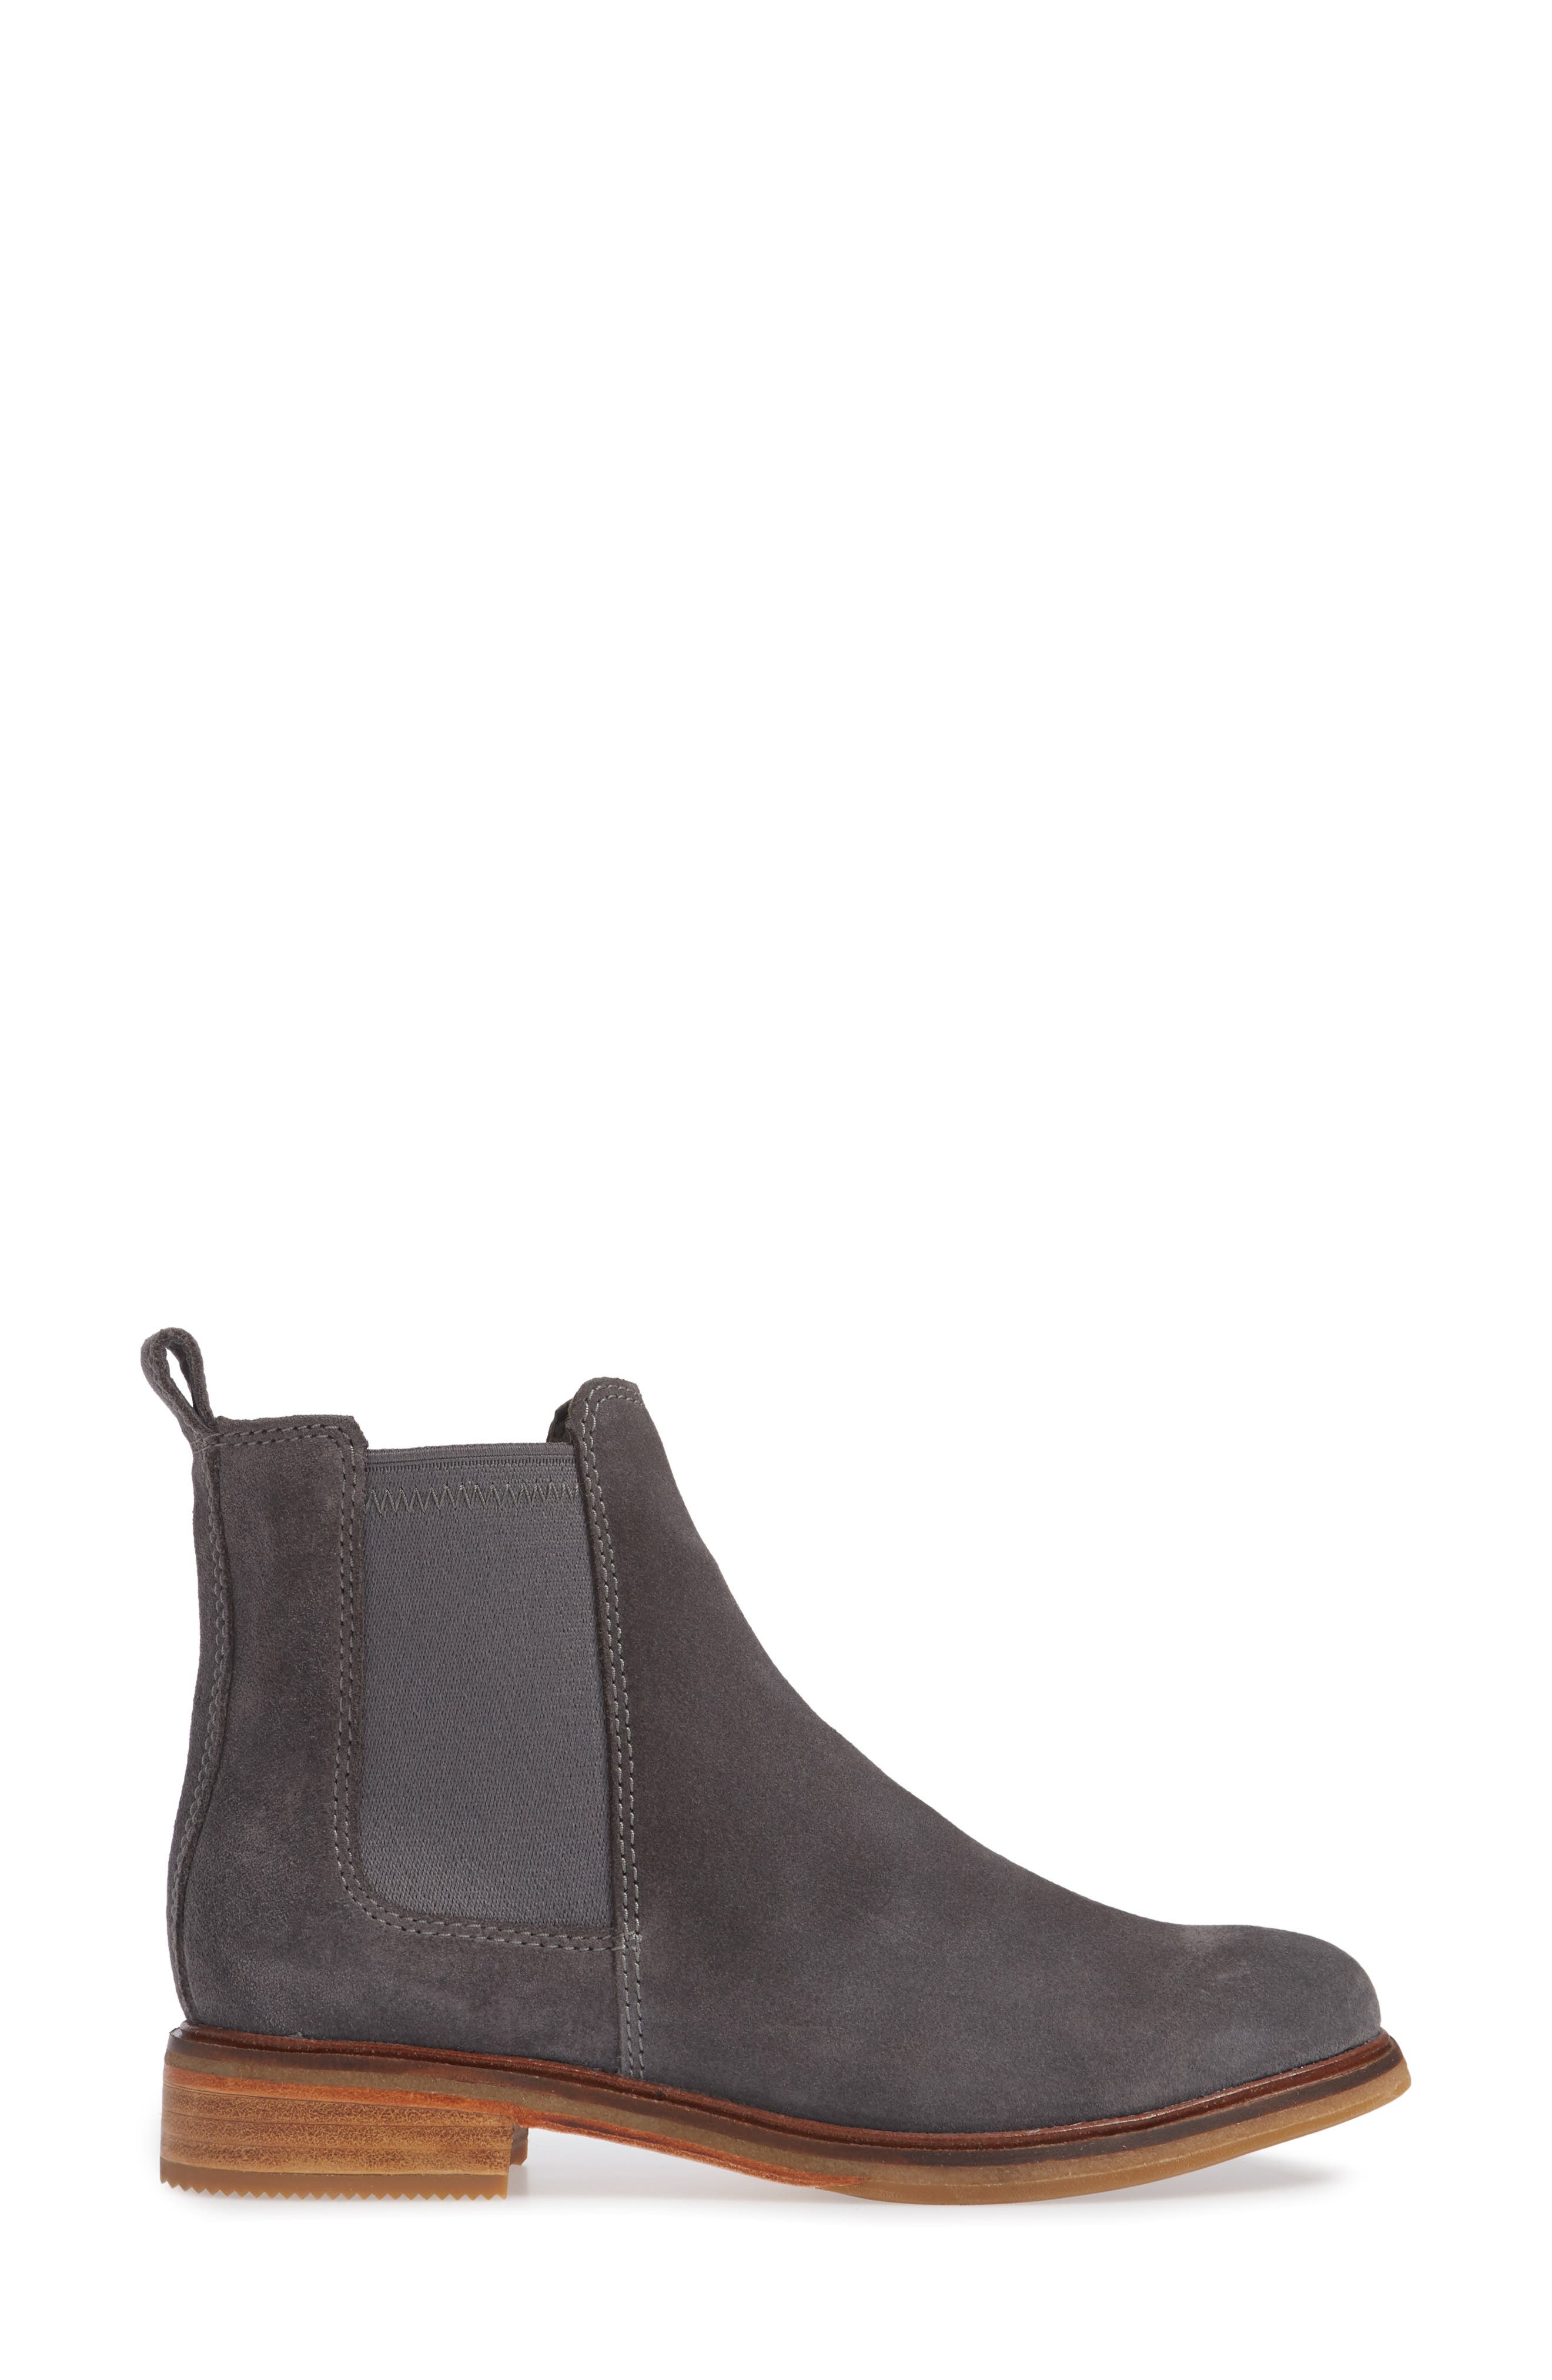 clarkdale boots womens